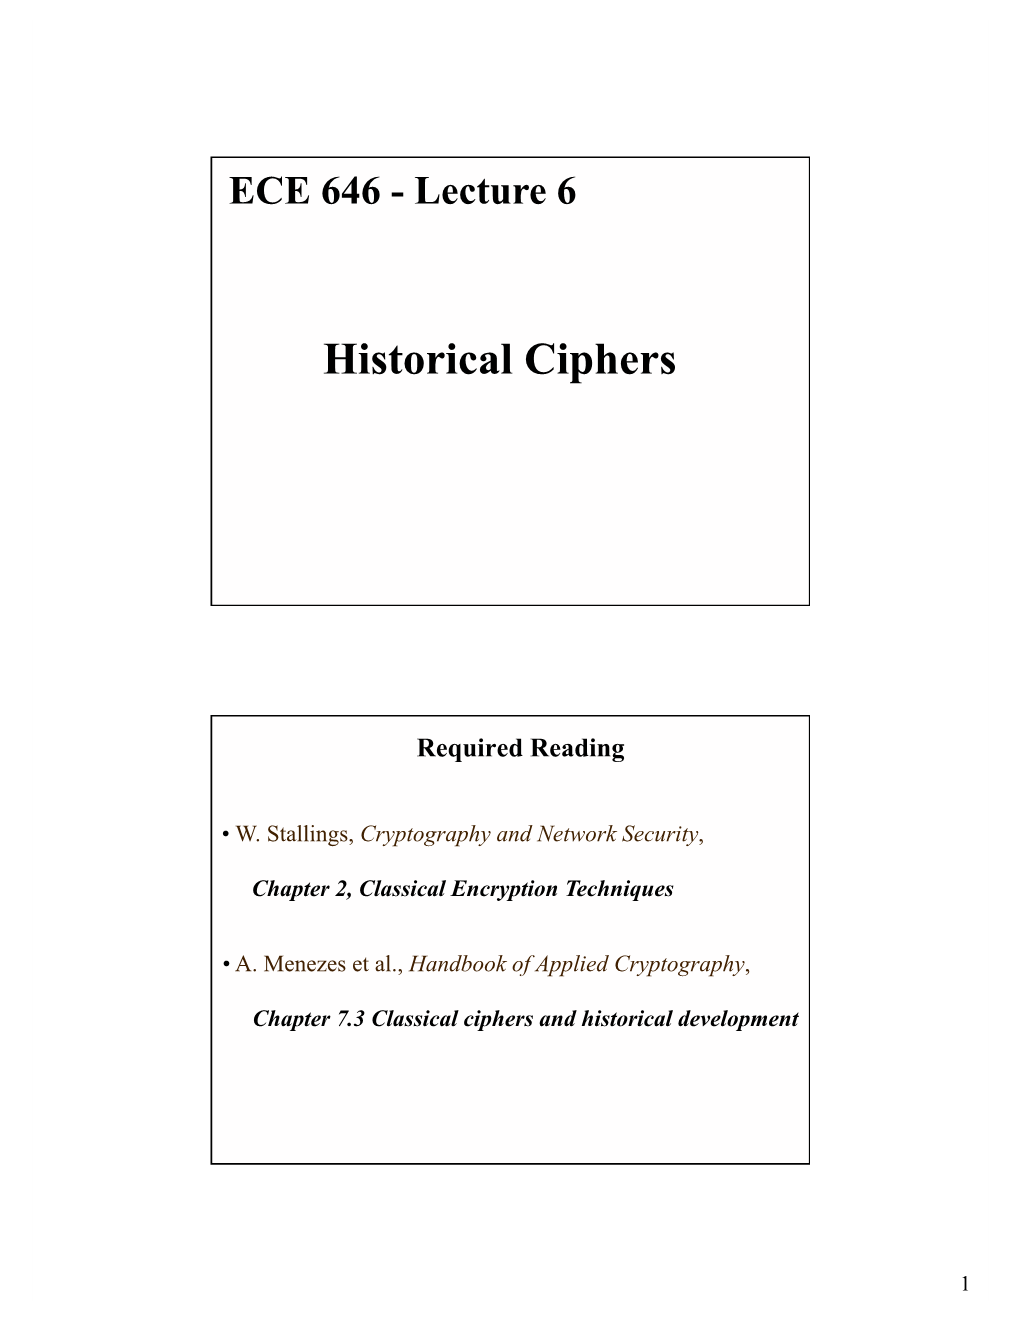 Historical Ciphers